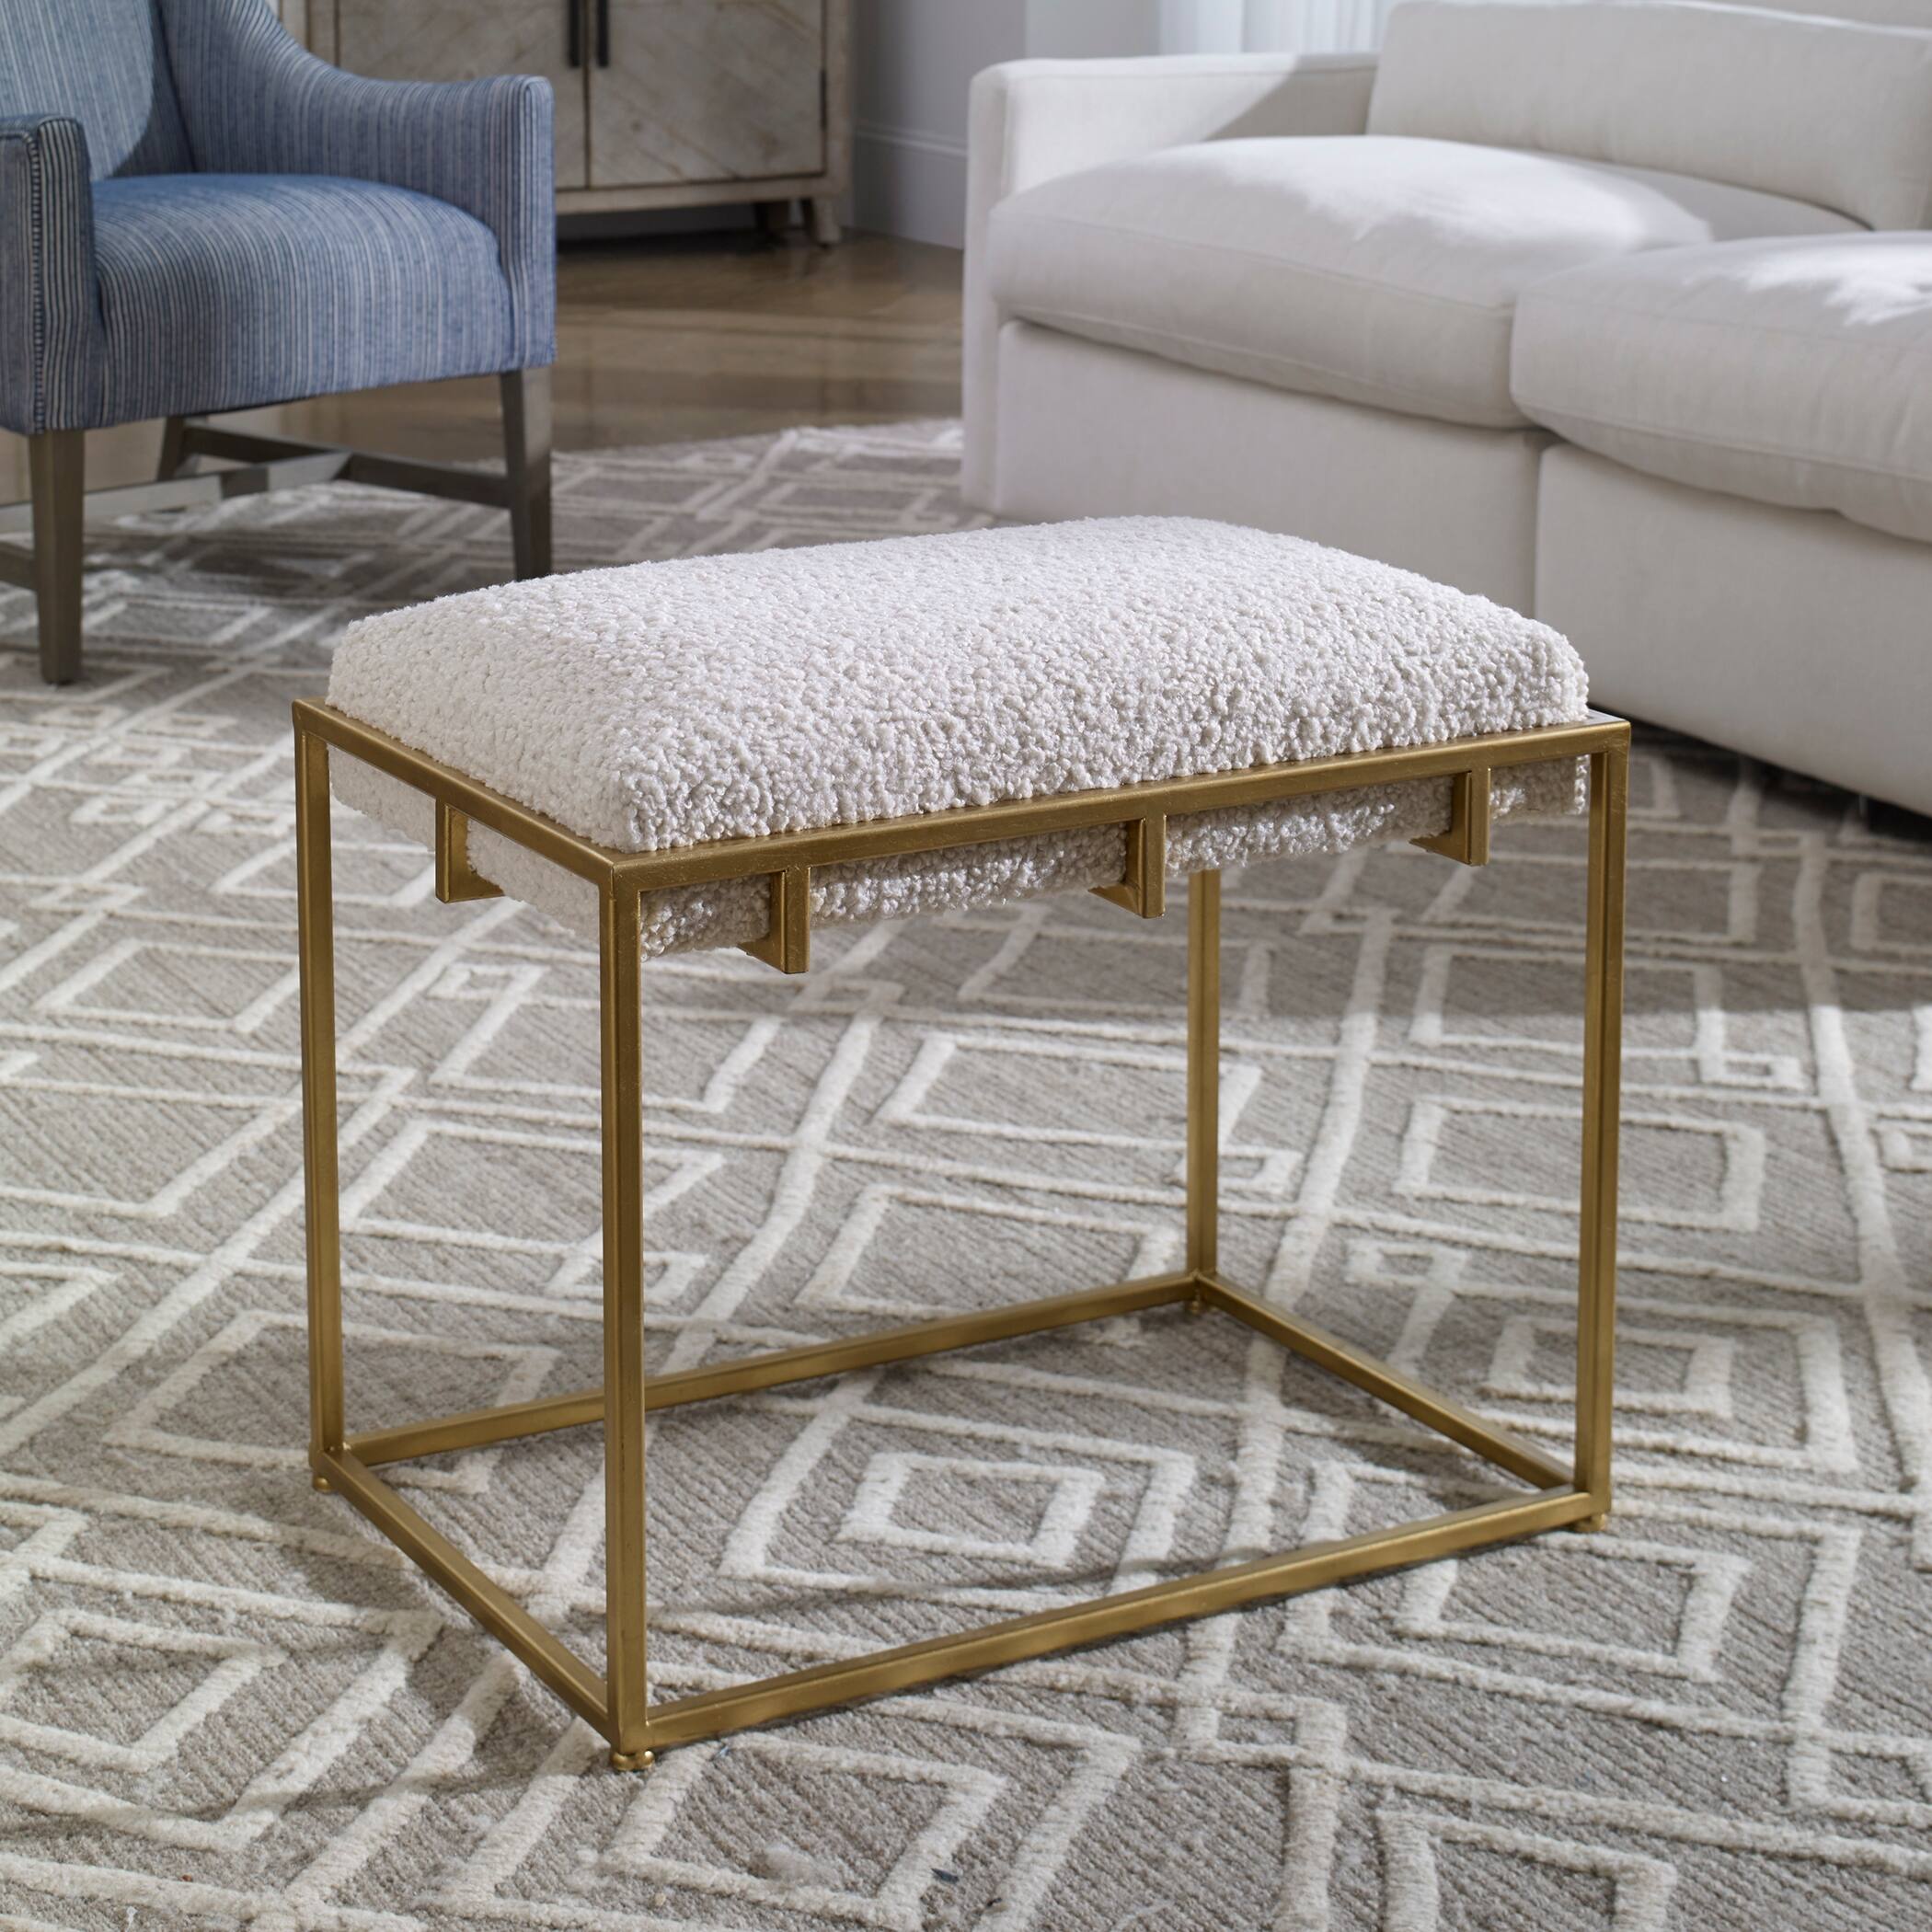 Uttermost Paradox Gold and White Small Shearling Bench